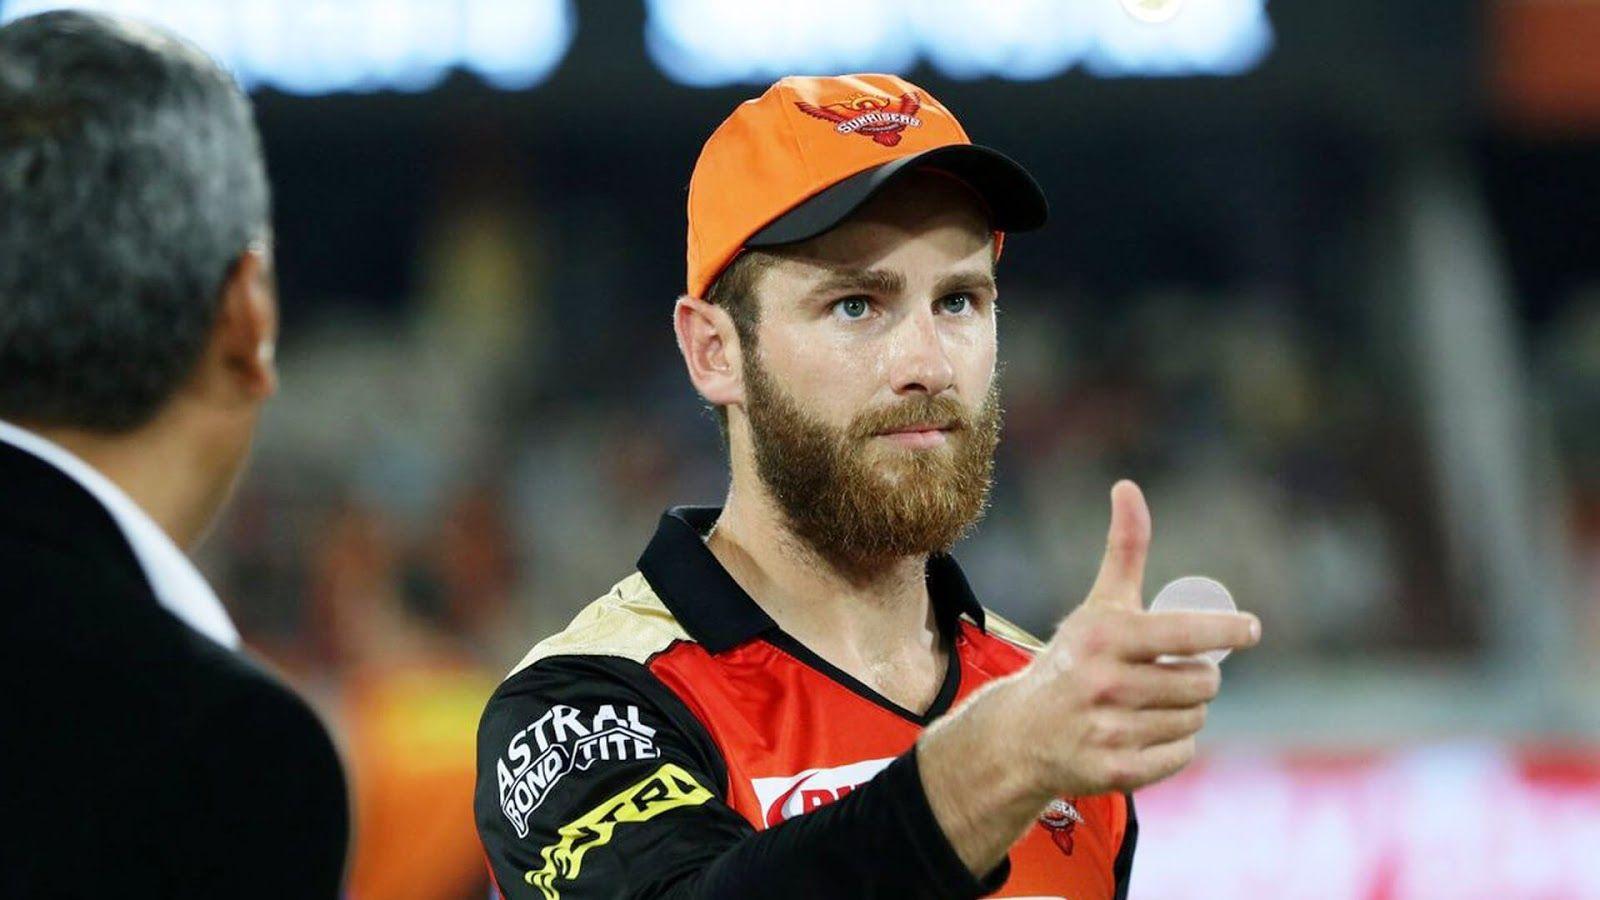 New Zealand players might miss IPL 2021 if it is restarted in SEP